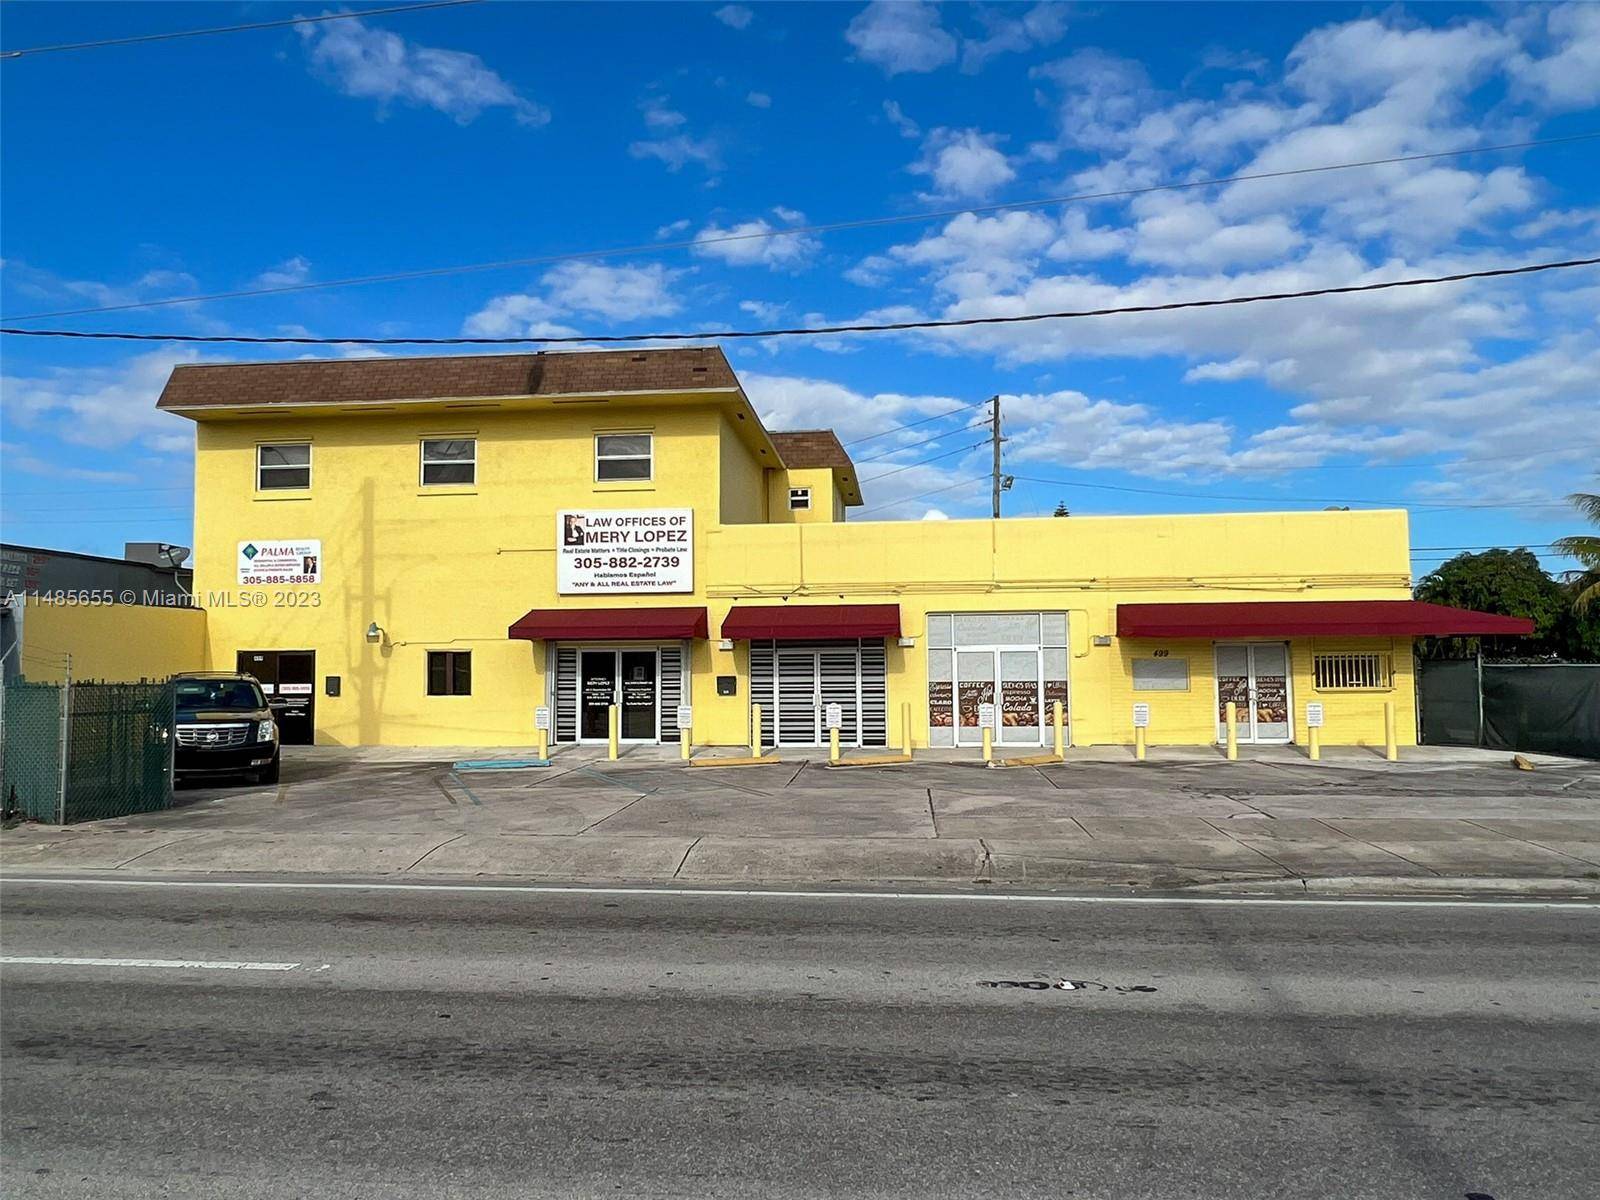 GREAT MIXED USE CORNER FREESTANDING BUILDING WITH STABLE RESIDENTIAL INCOME.